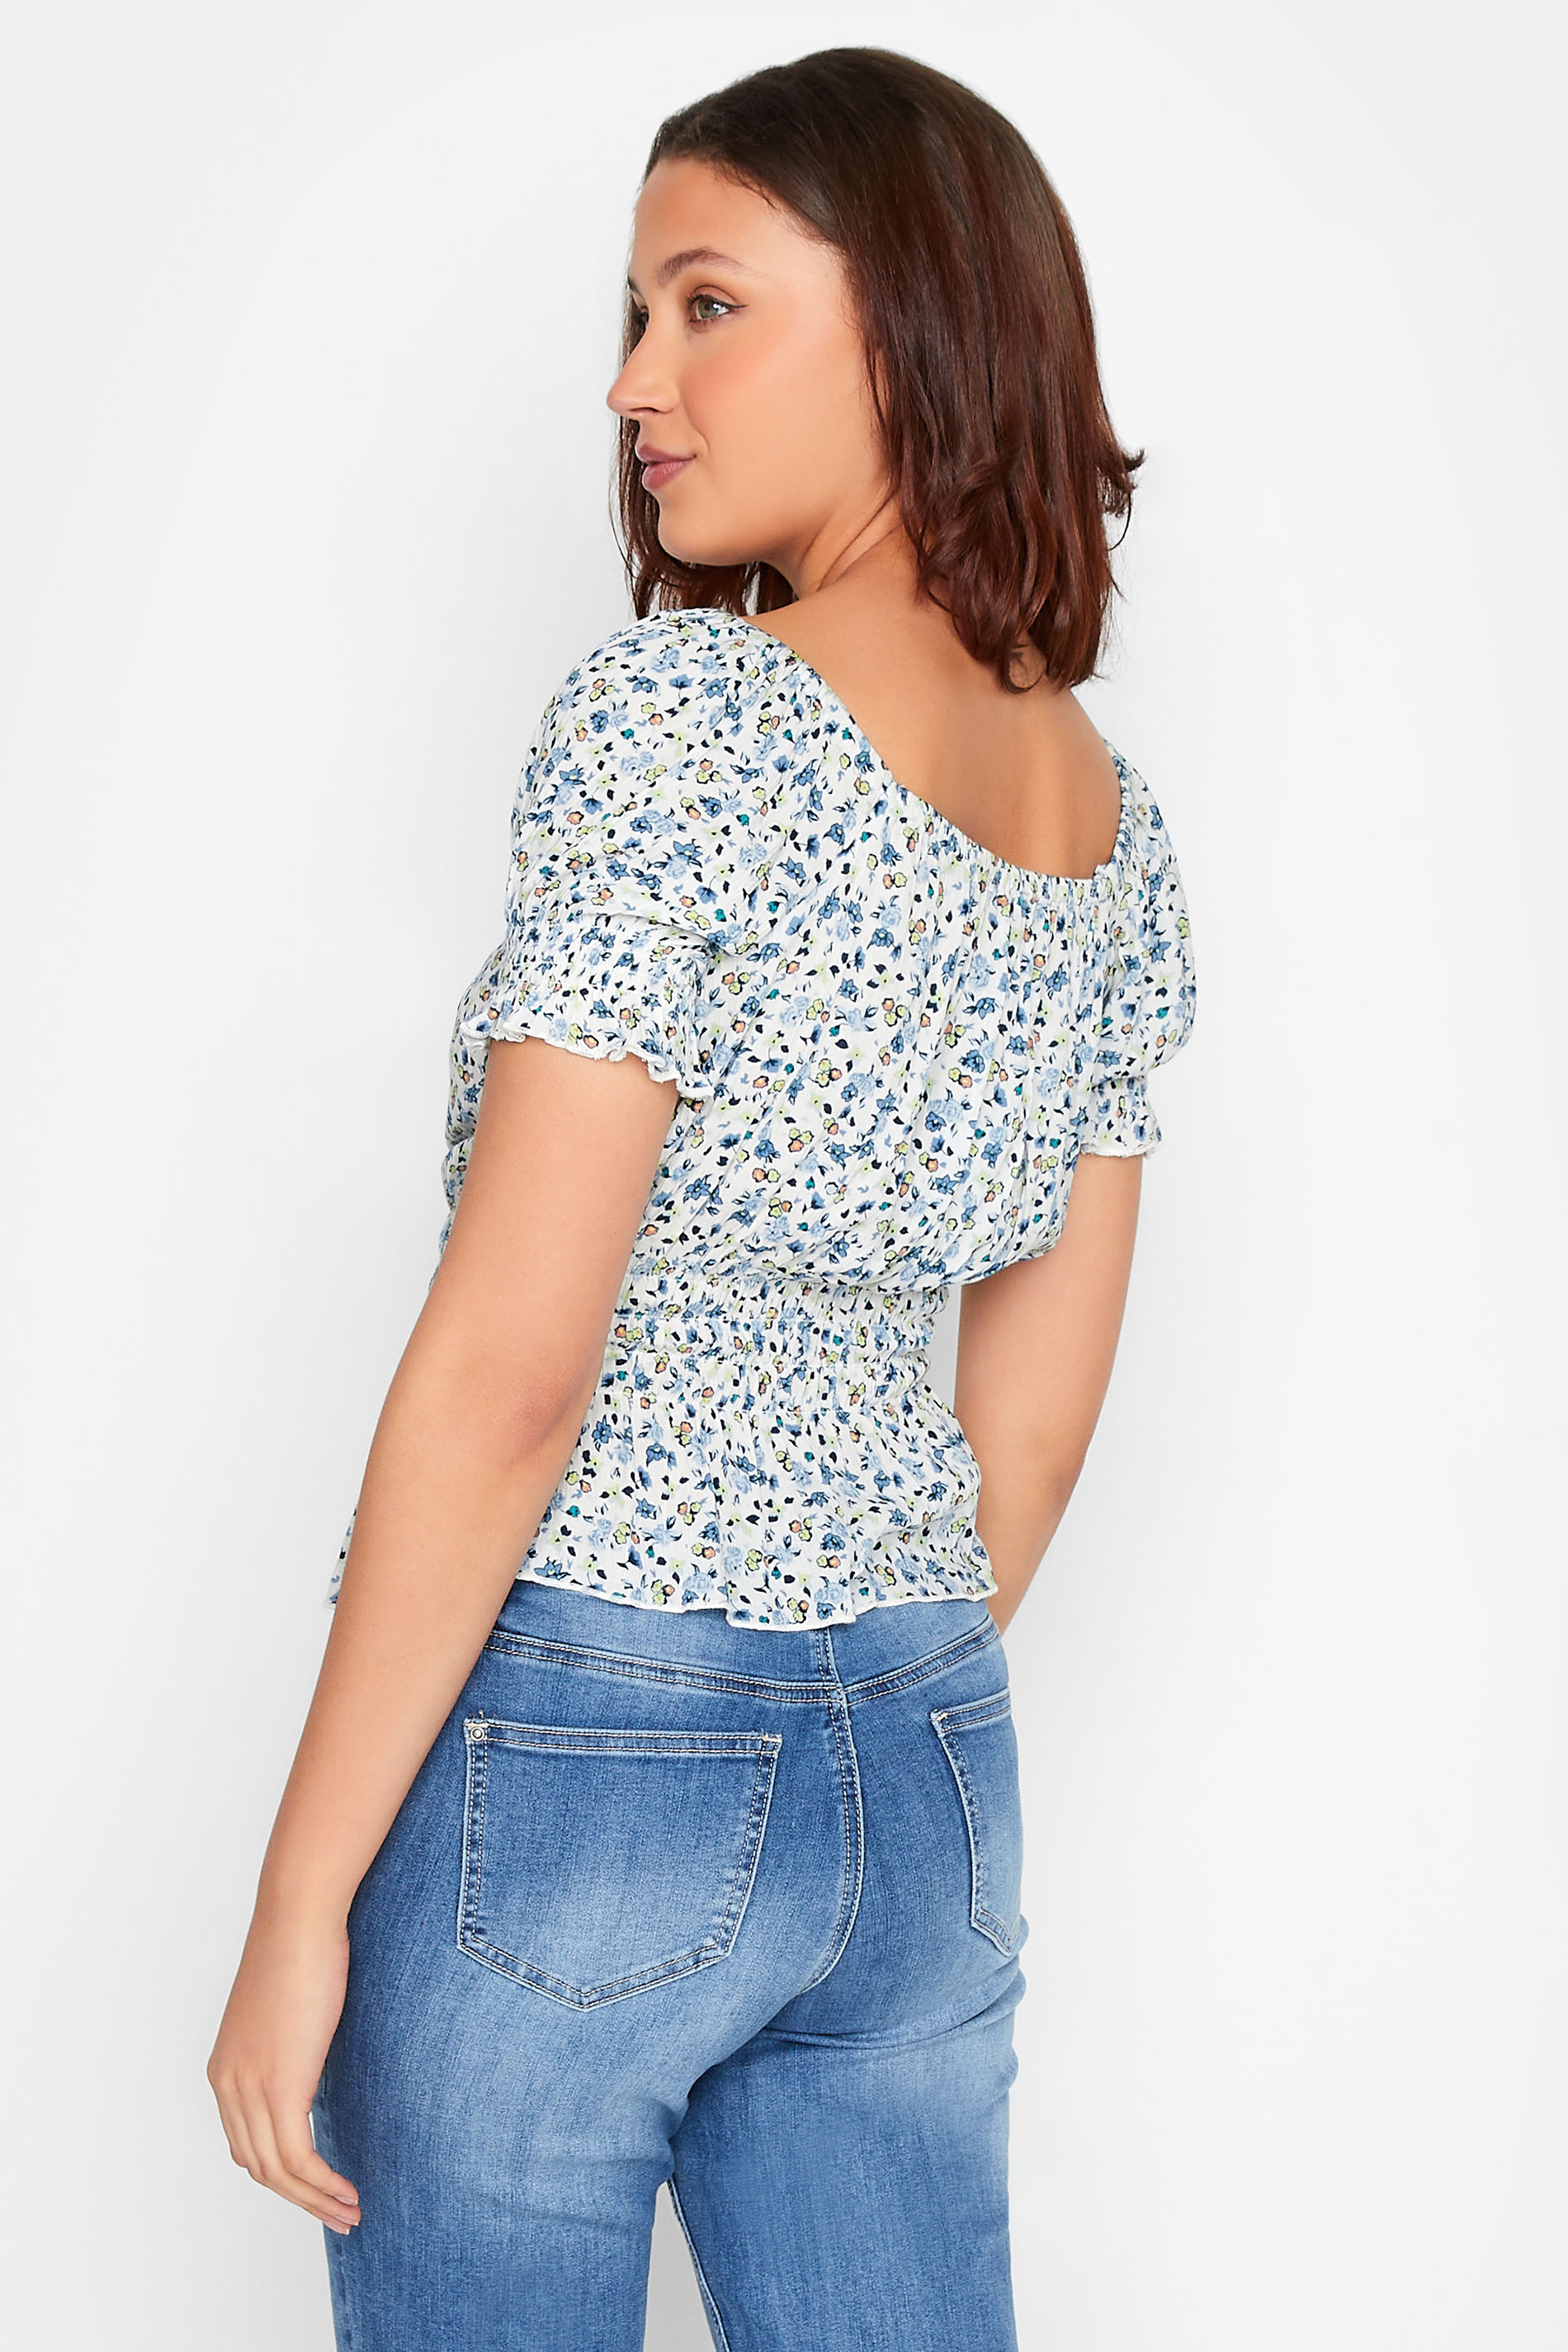 LTS Tall Women's White & Blue Floral Crinkle Bardot Top | Long Tall Sally 3